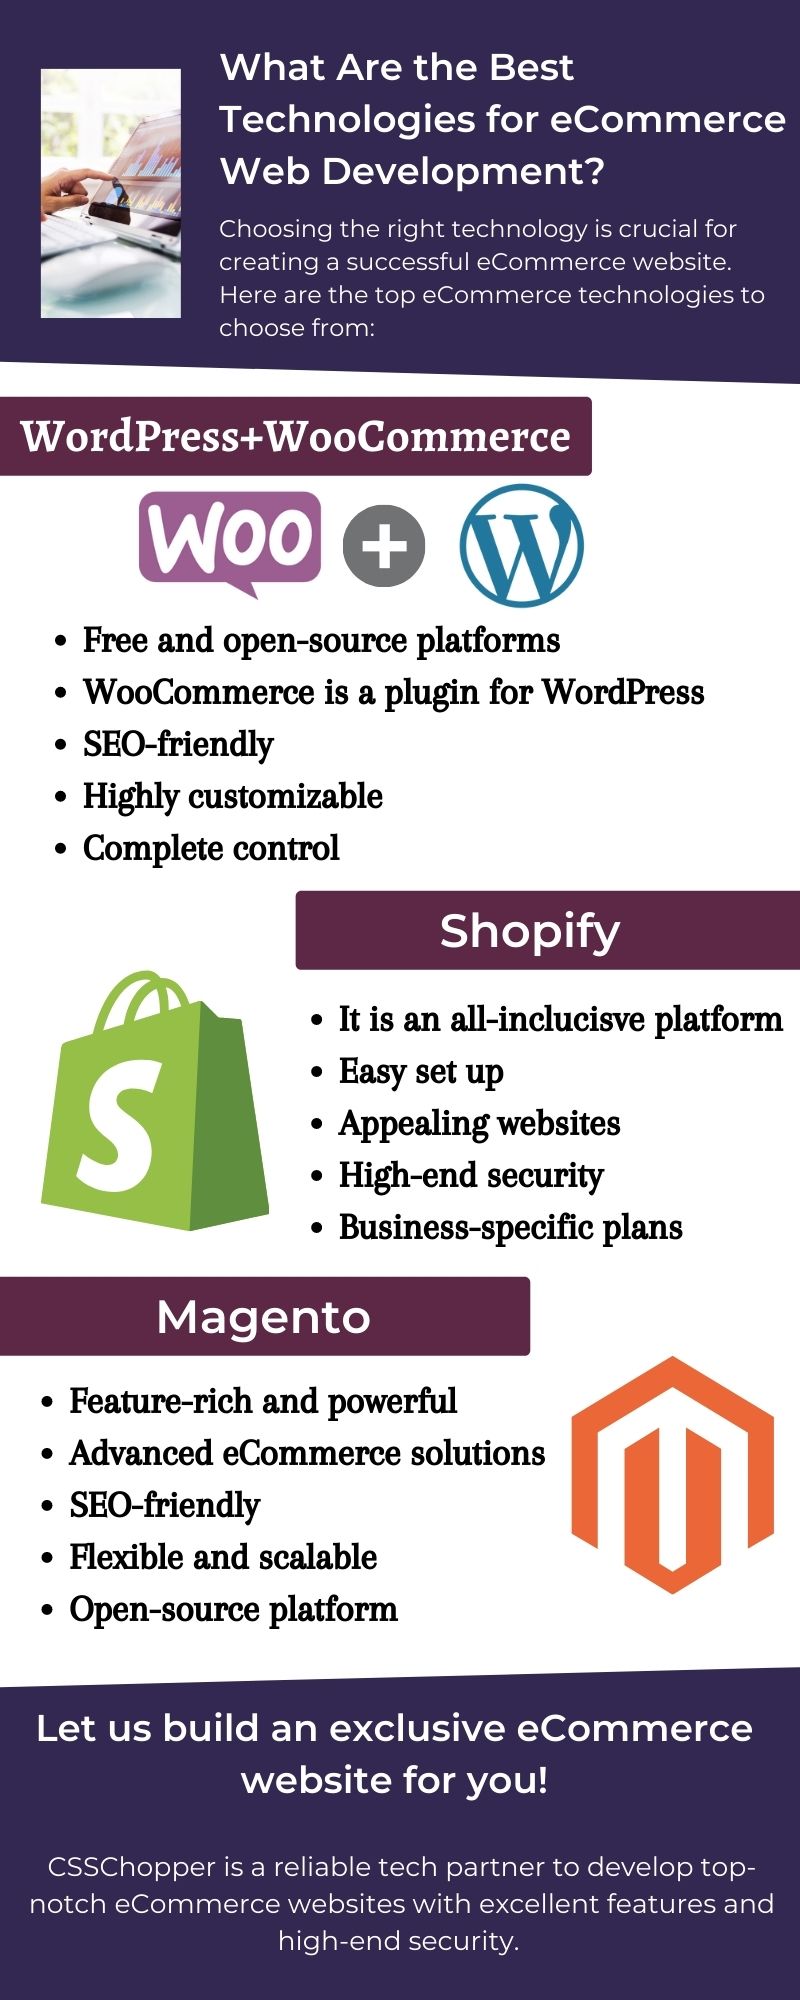 What Are the Best Technologies for eCommerce Web Development